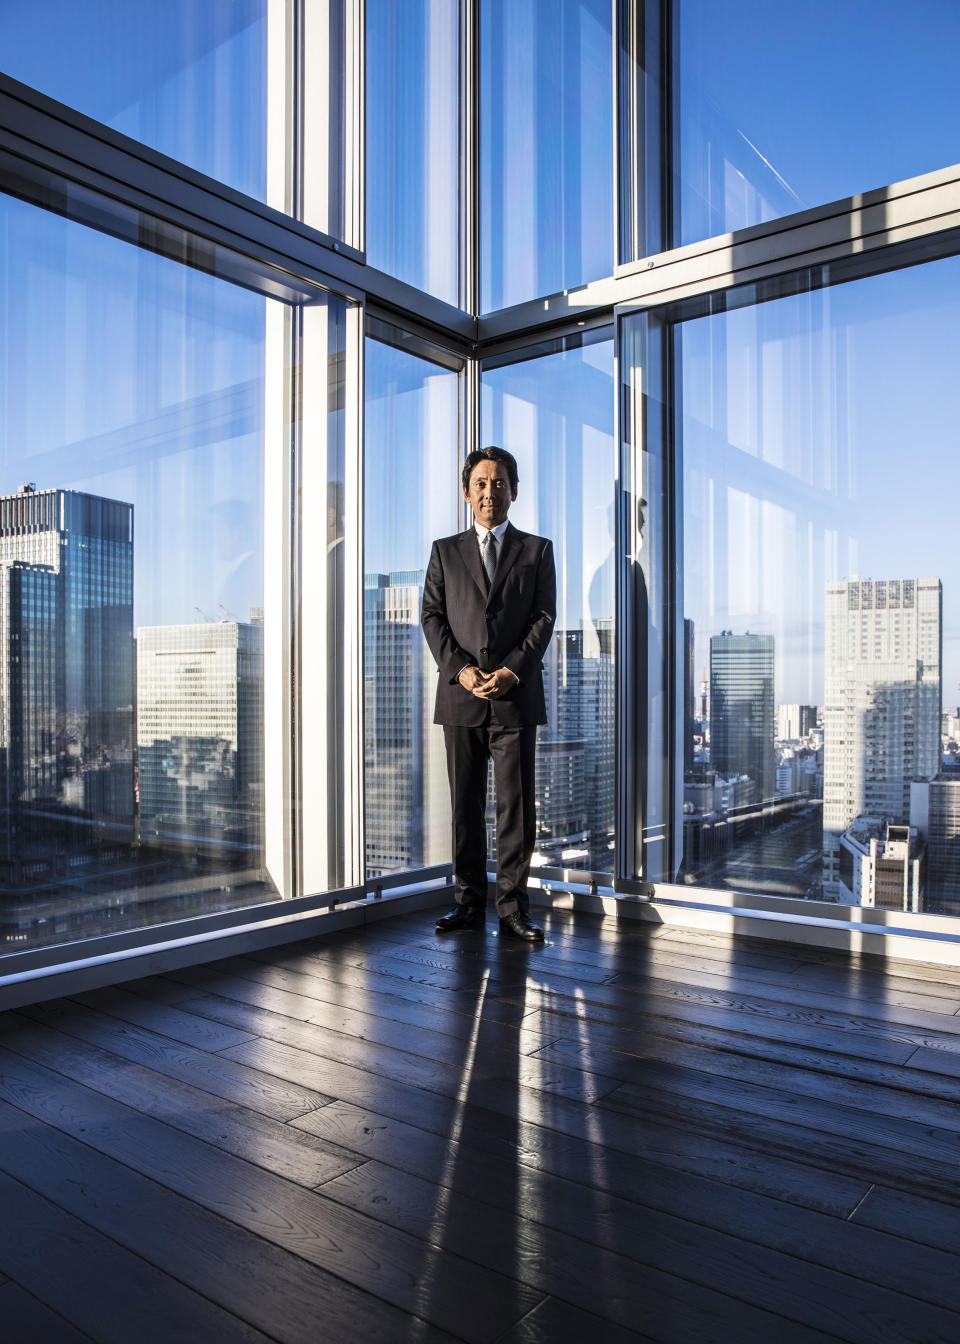 This Company Is Japan’s Top Contender for Global Internet Domination